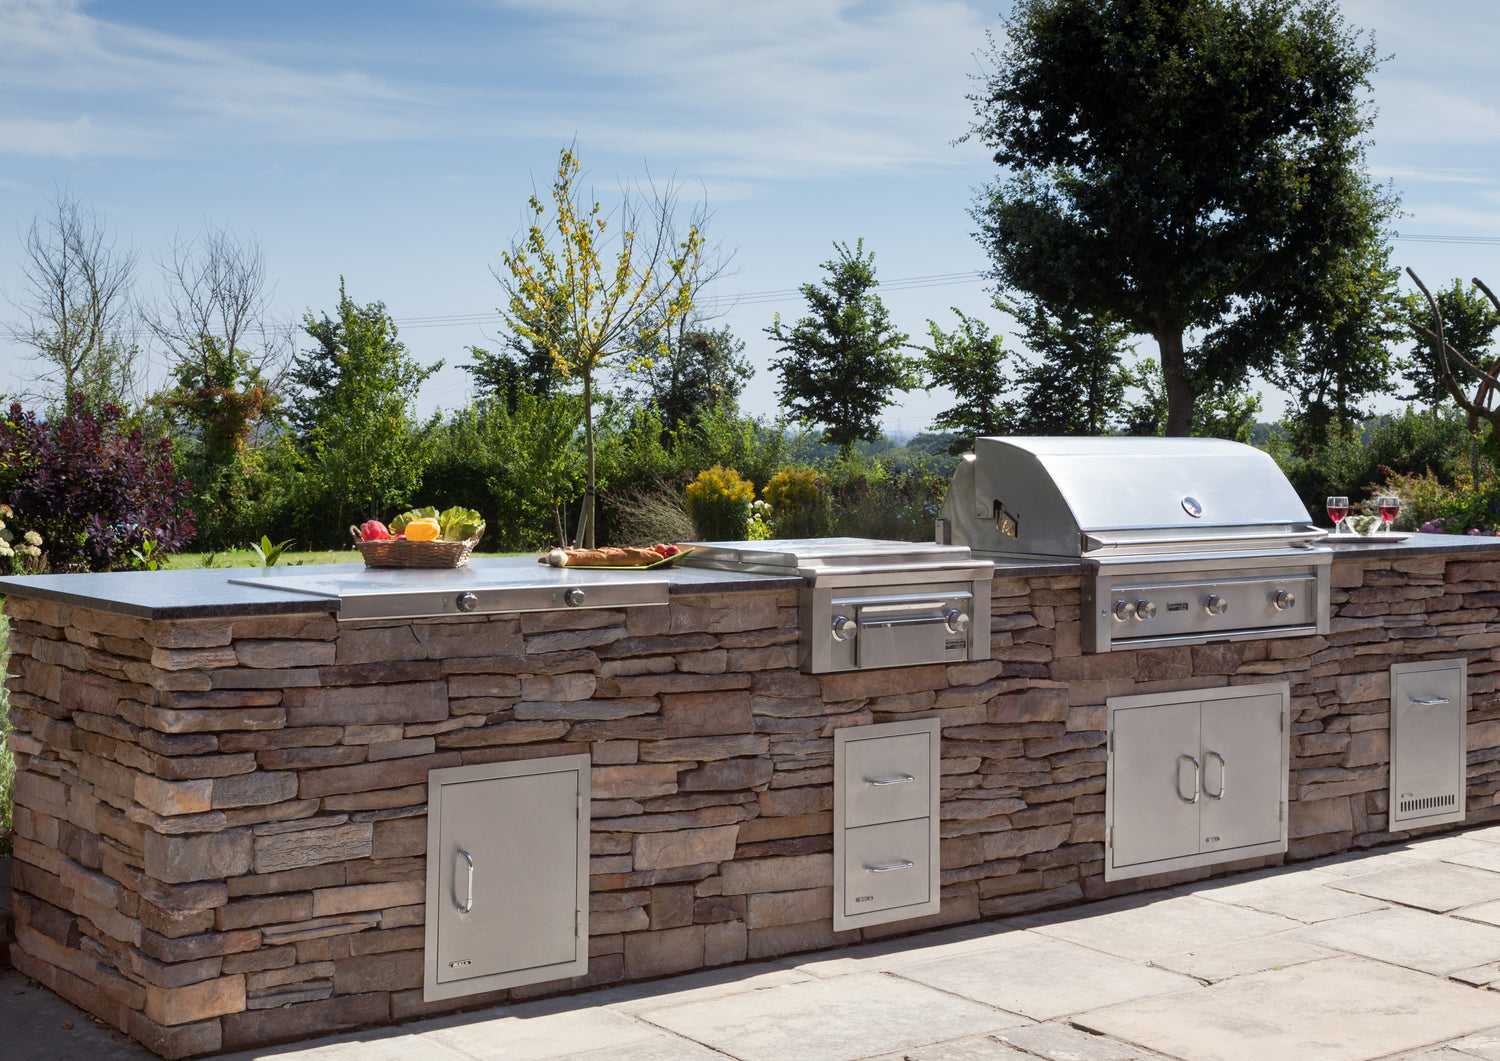 Beautiful Outdoor Kitchens - bespoke, module or freestanding carts - for the ultimate in outdoor cooking